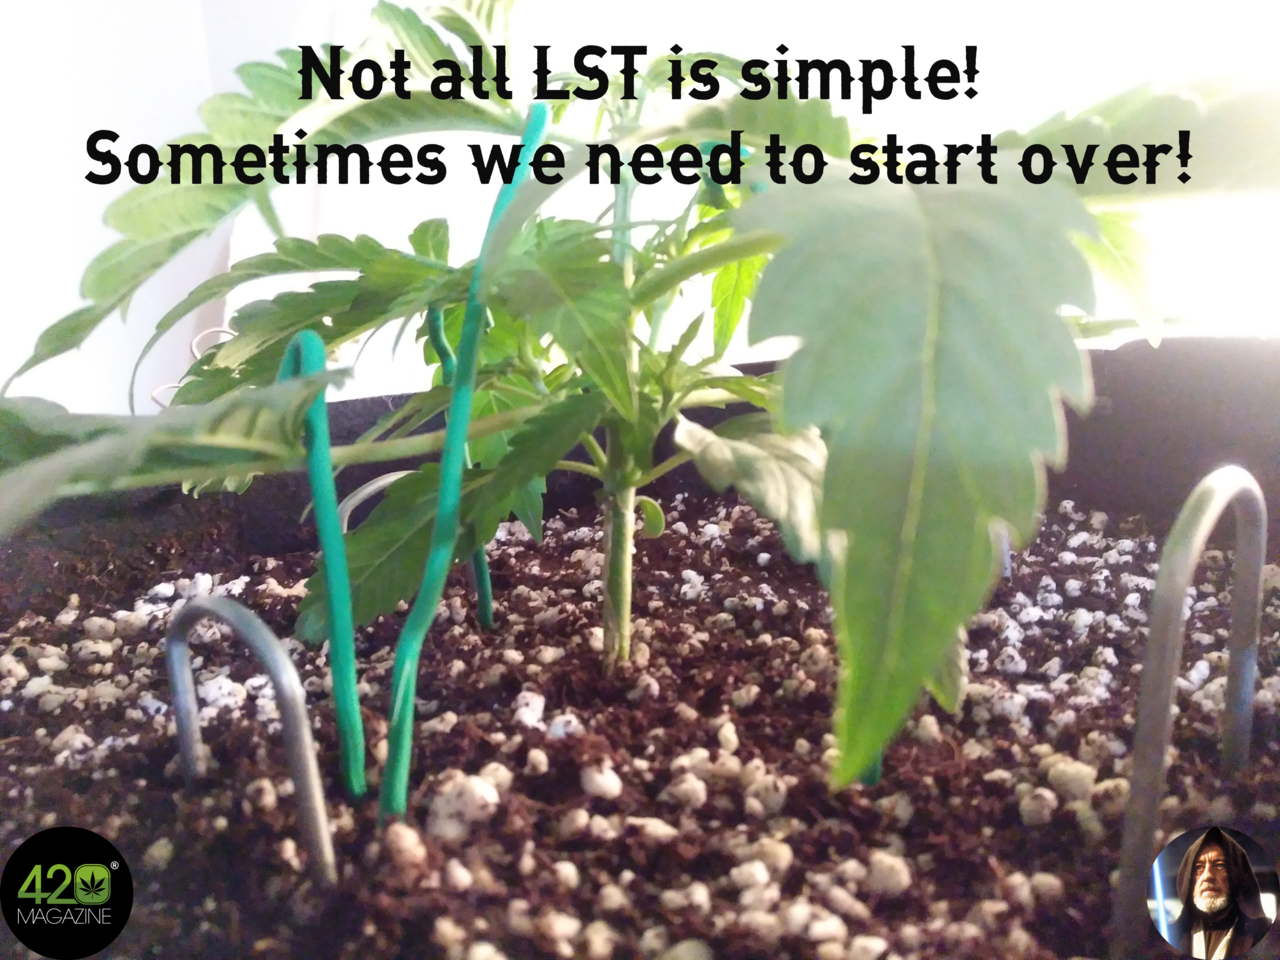 Not all LST is simple.